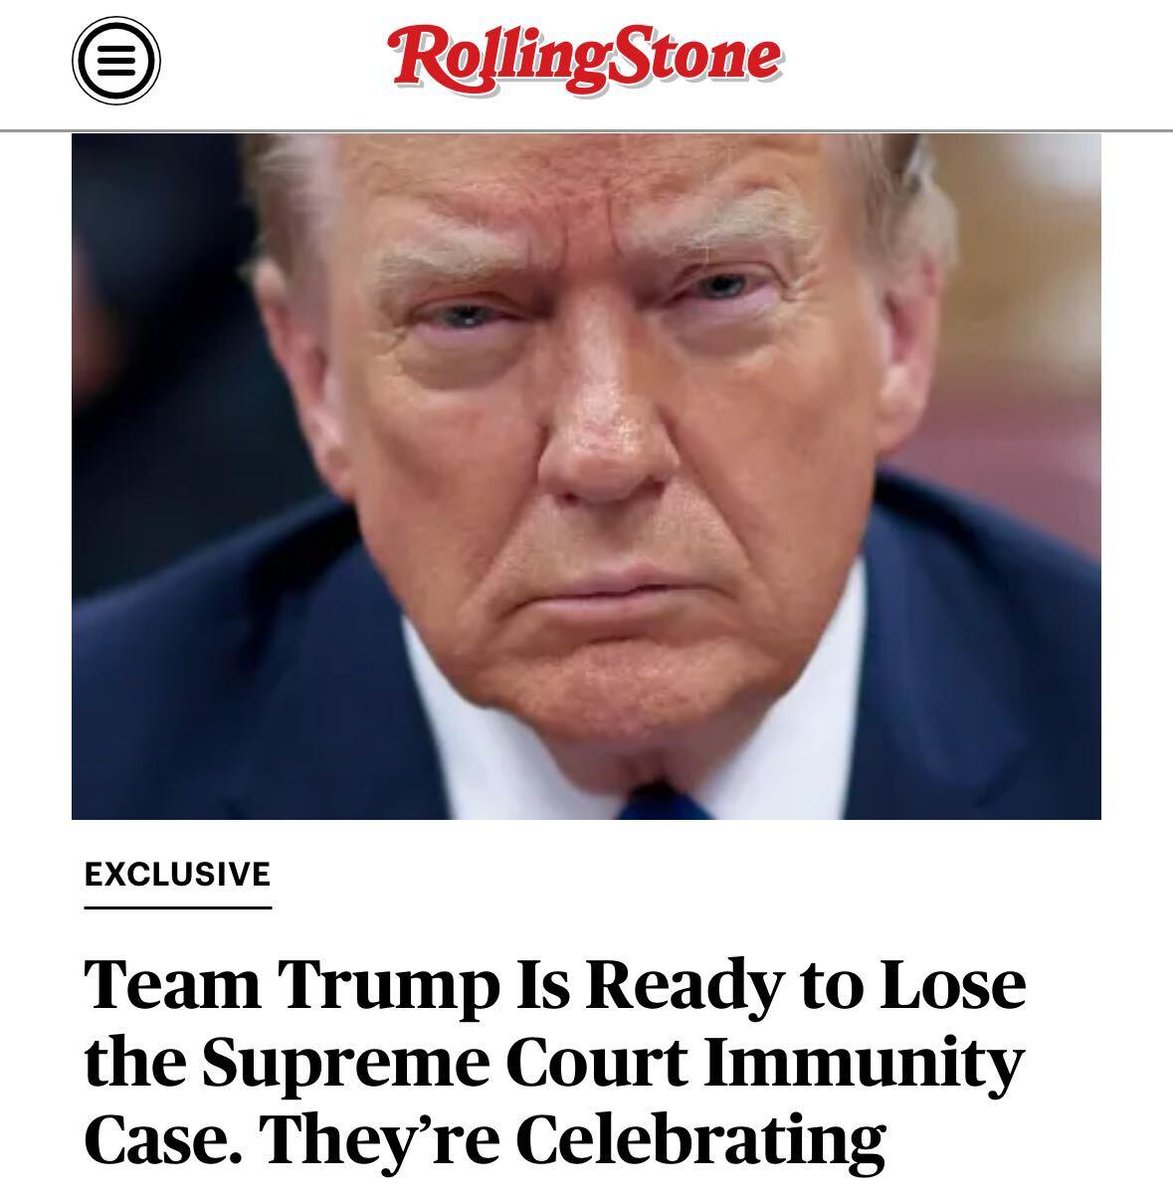 EXCLUSIVE: Team Trump doesn’t expect the Supreme Court to bless his extreme vision of presidential immunity for life. “We already pulled off the heist,” says a source close to Trump. Story: rollingstone.com/politics/polit…